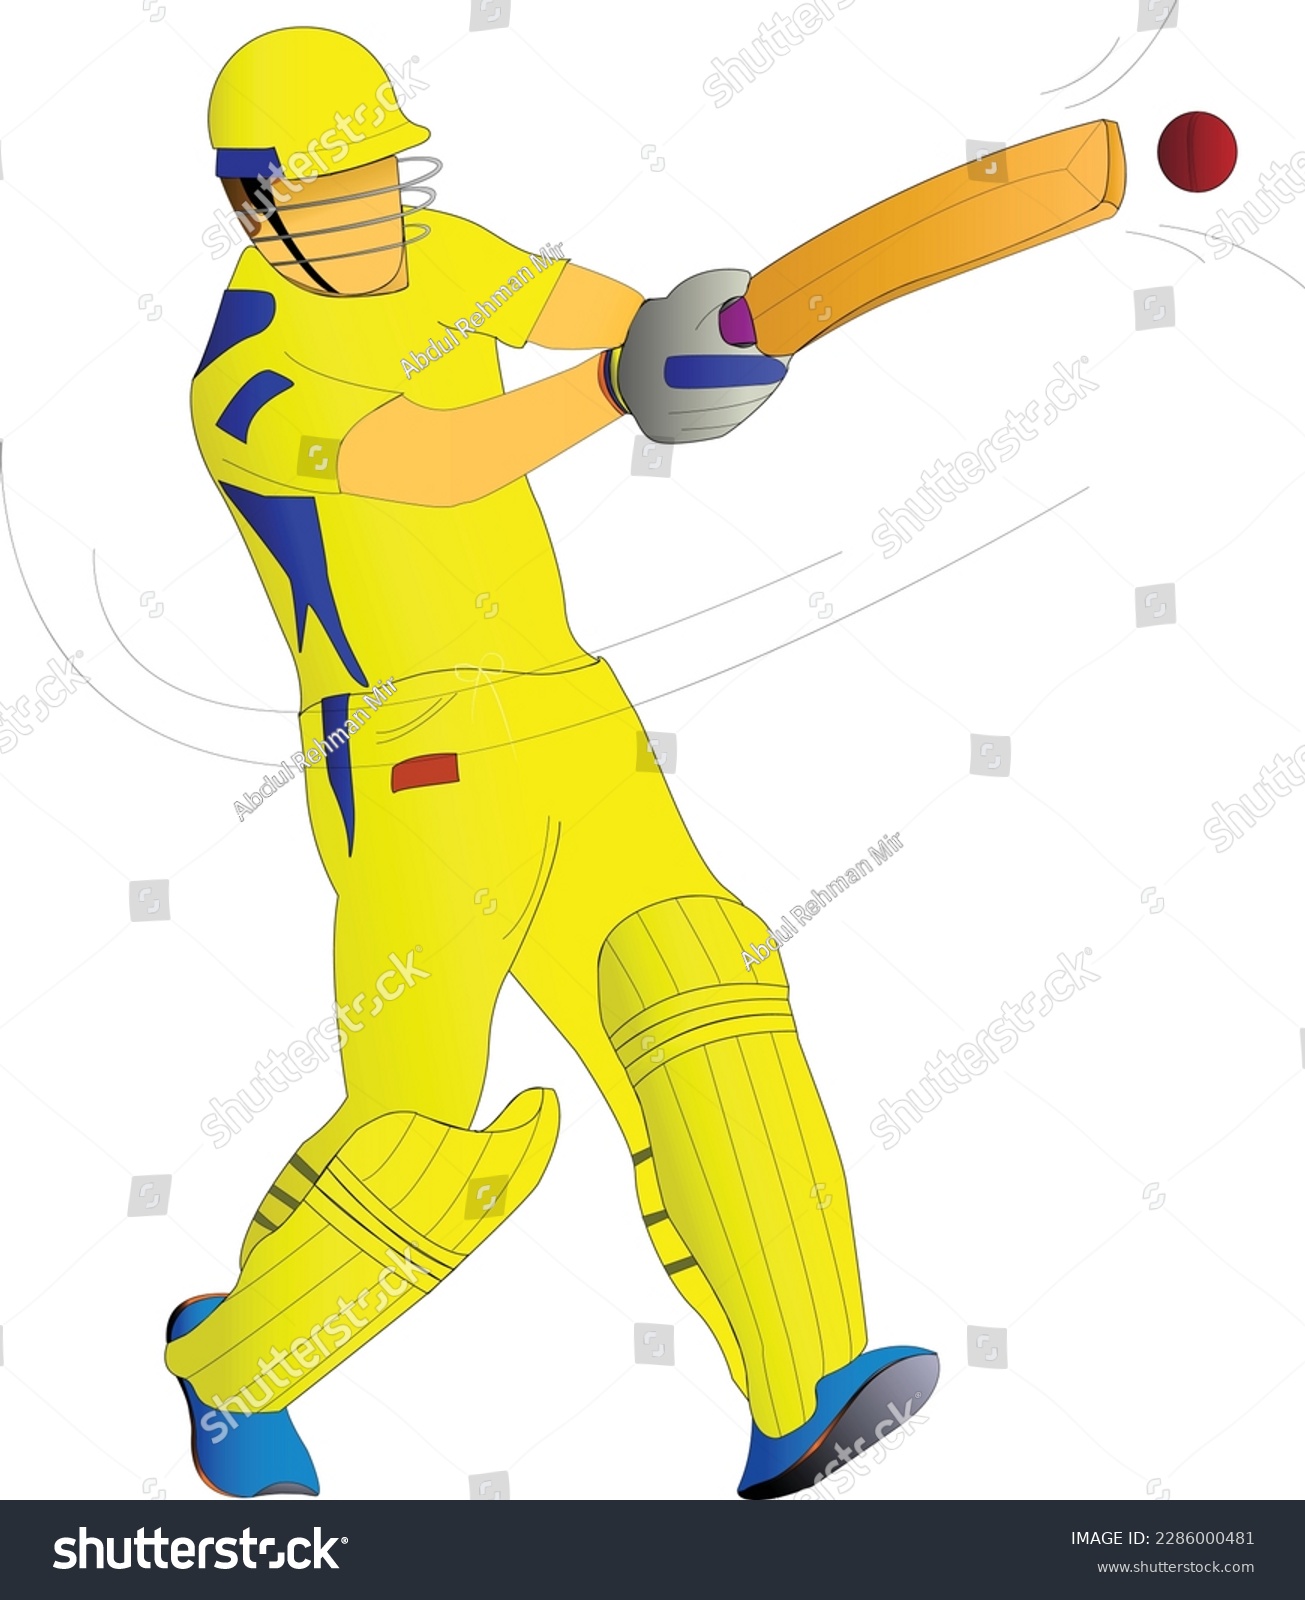 SVG of Men in Yellow Jersey Playing Cricket. Batsman or Cricketer svg